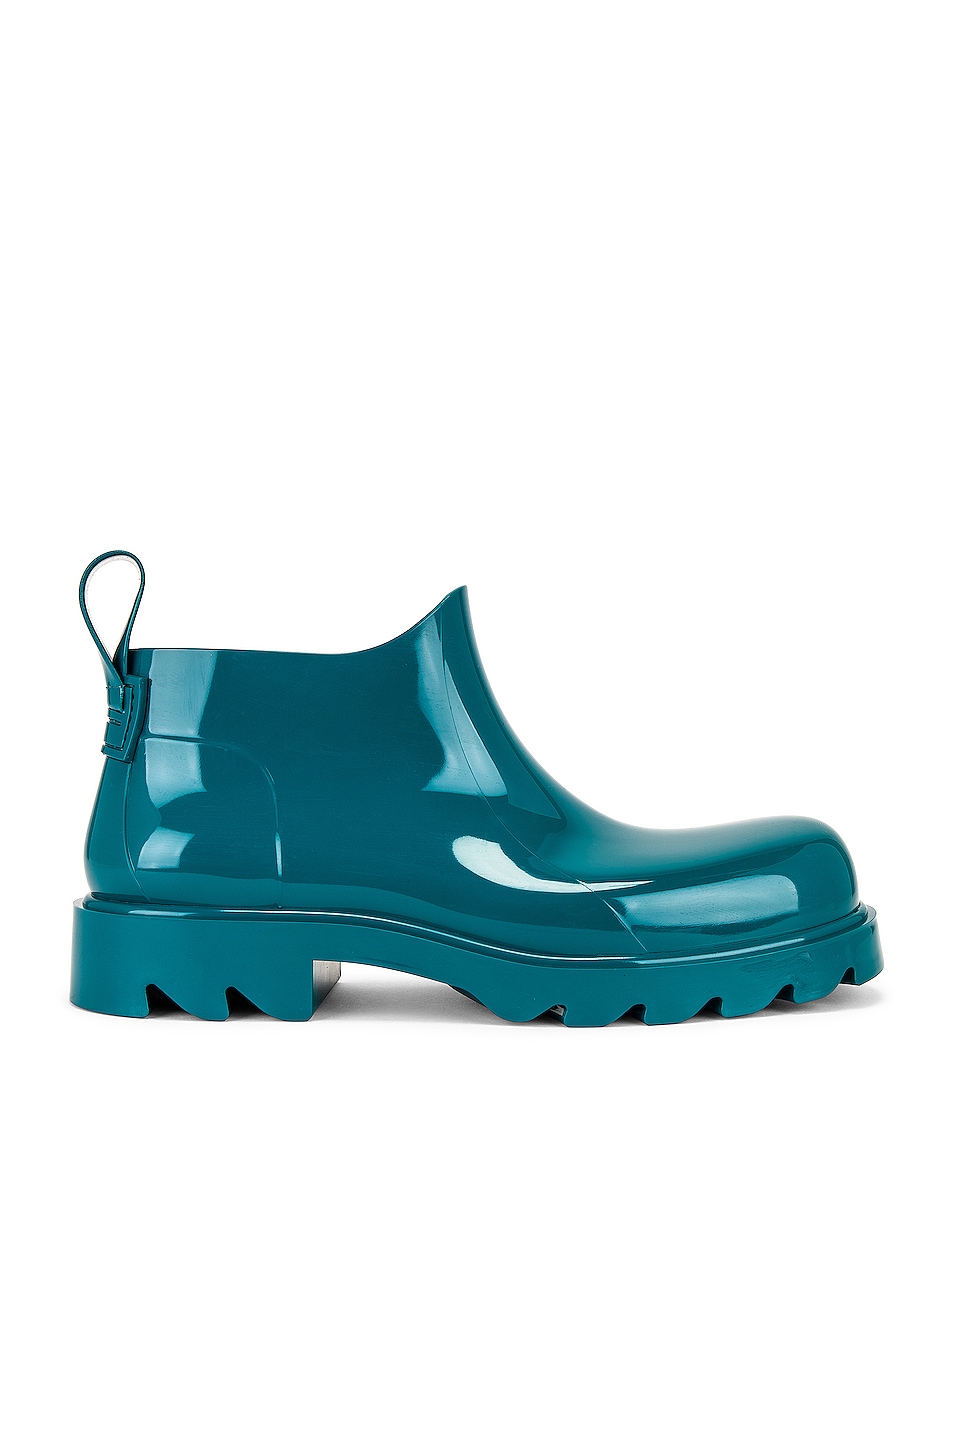 Shiny Rubber Boot in Teal